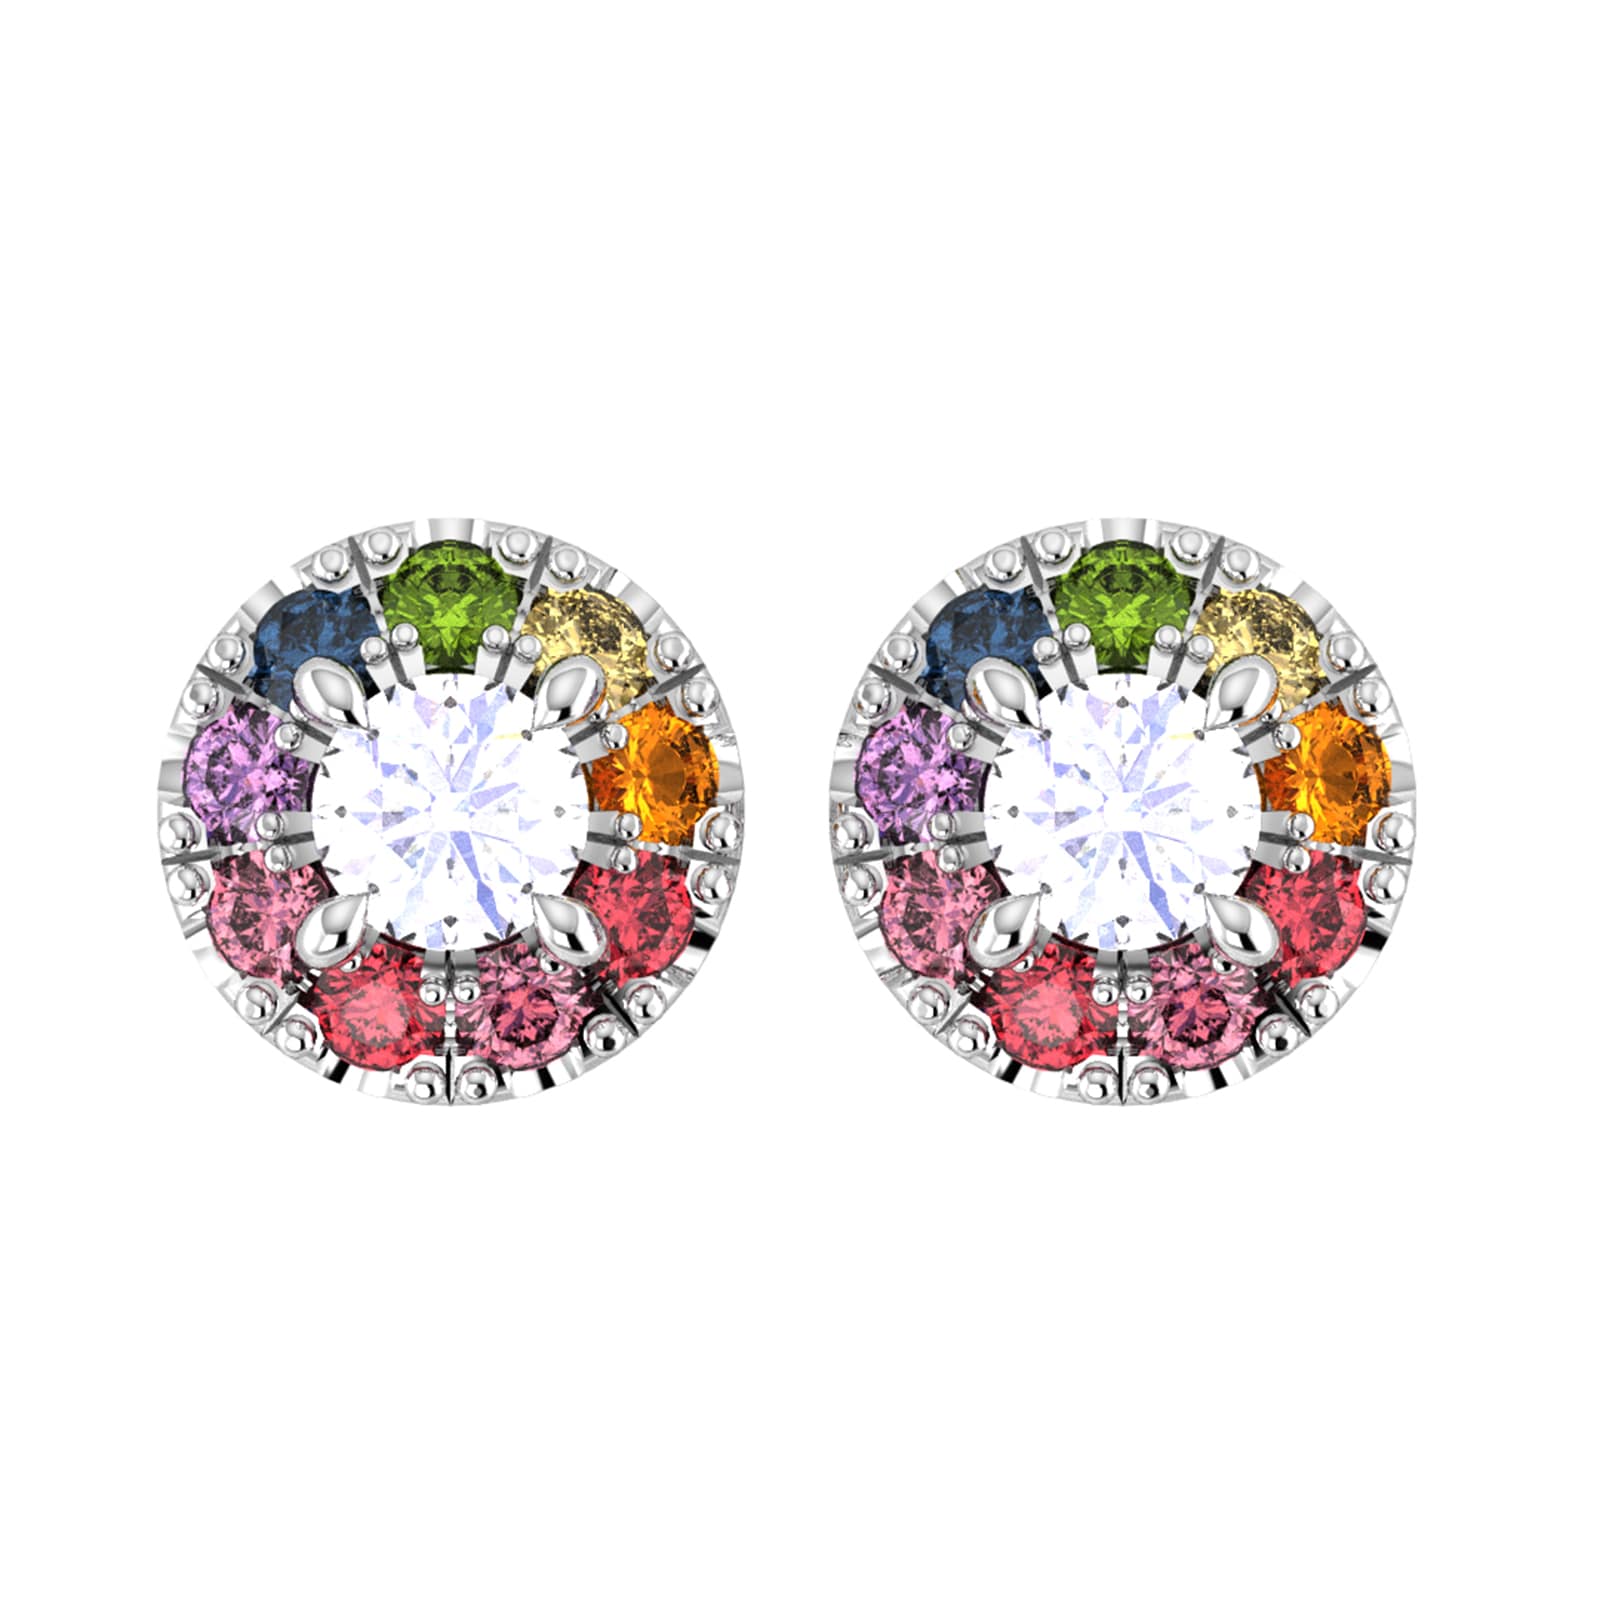 18ct White Gold Rainbow Sapphire & Diamond Clip Stud Earrings | Buy Online  | Free Insured UK Delivery